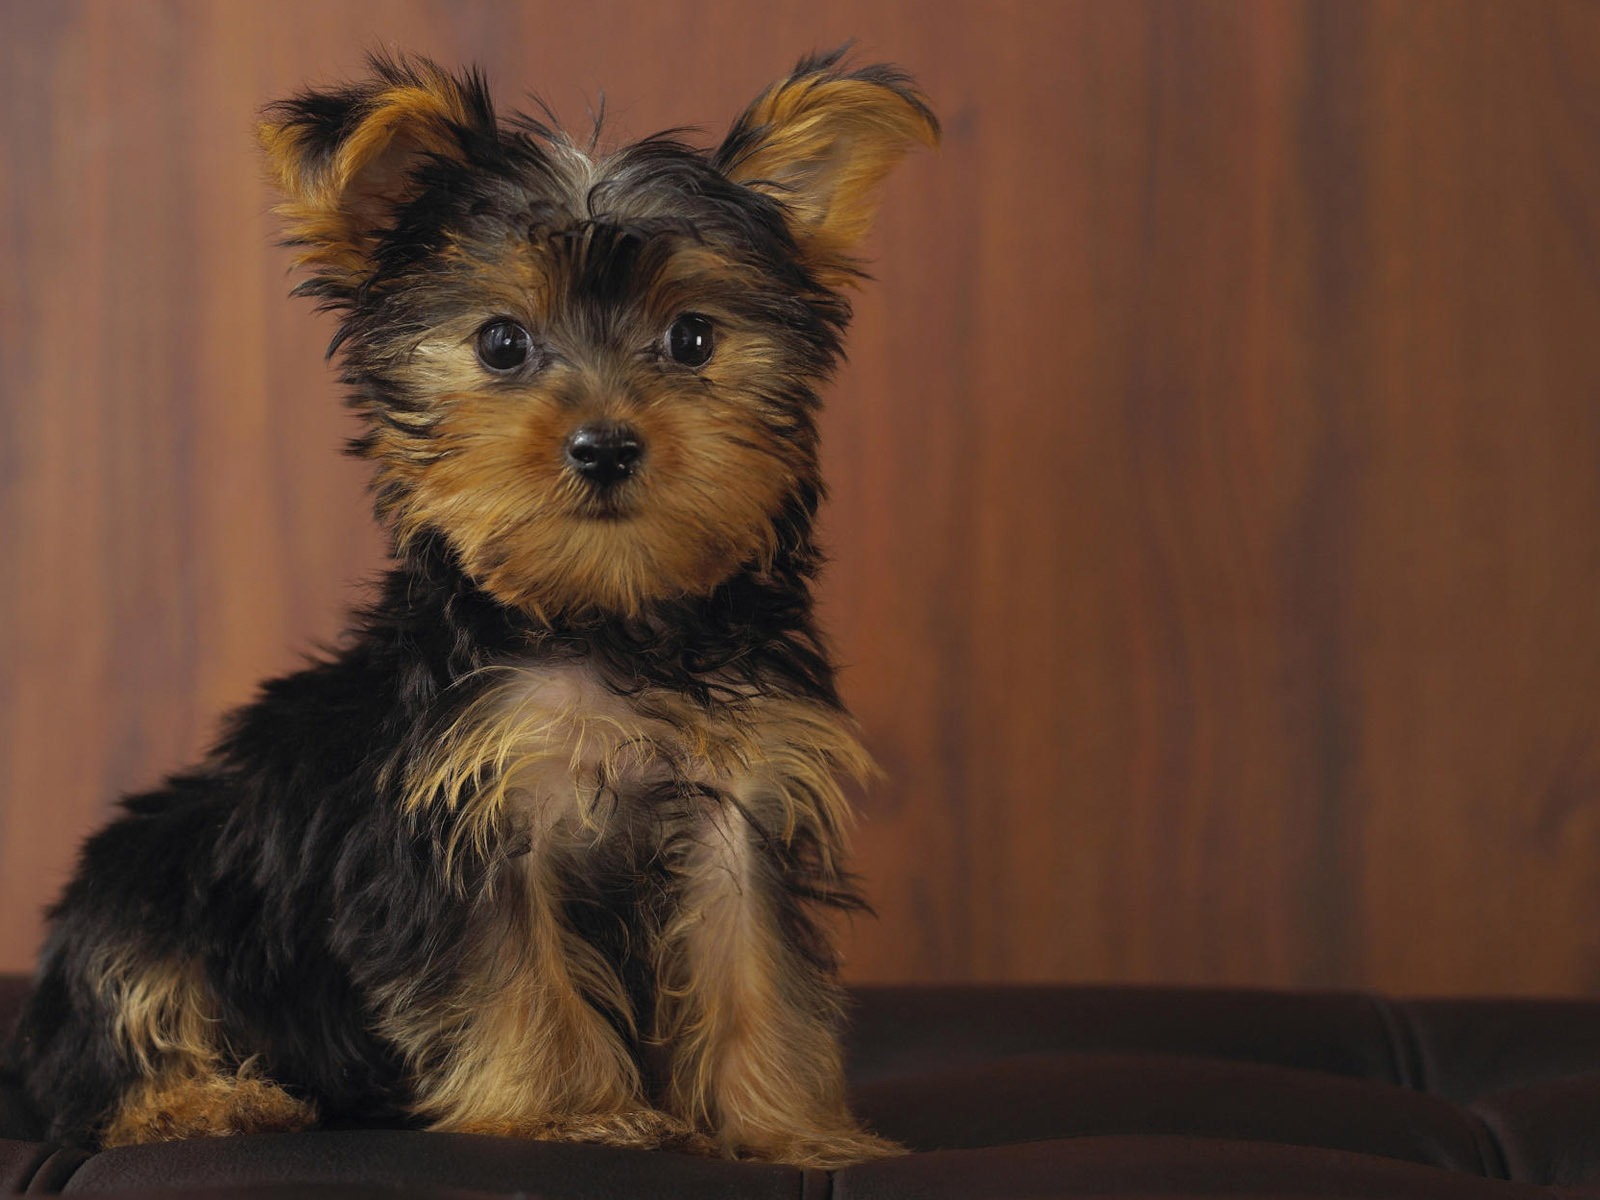 Puppy Photo HD wallpapers (7) #7 - 1600x1200